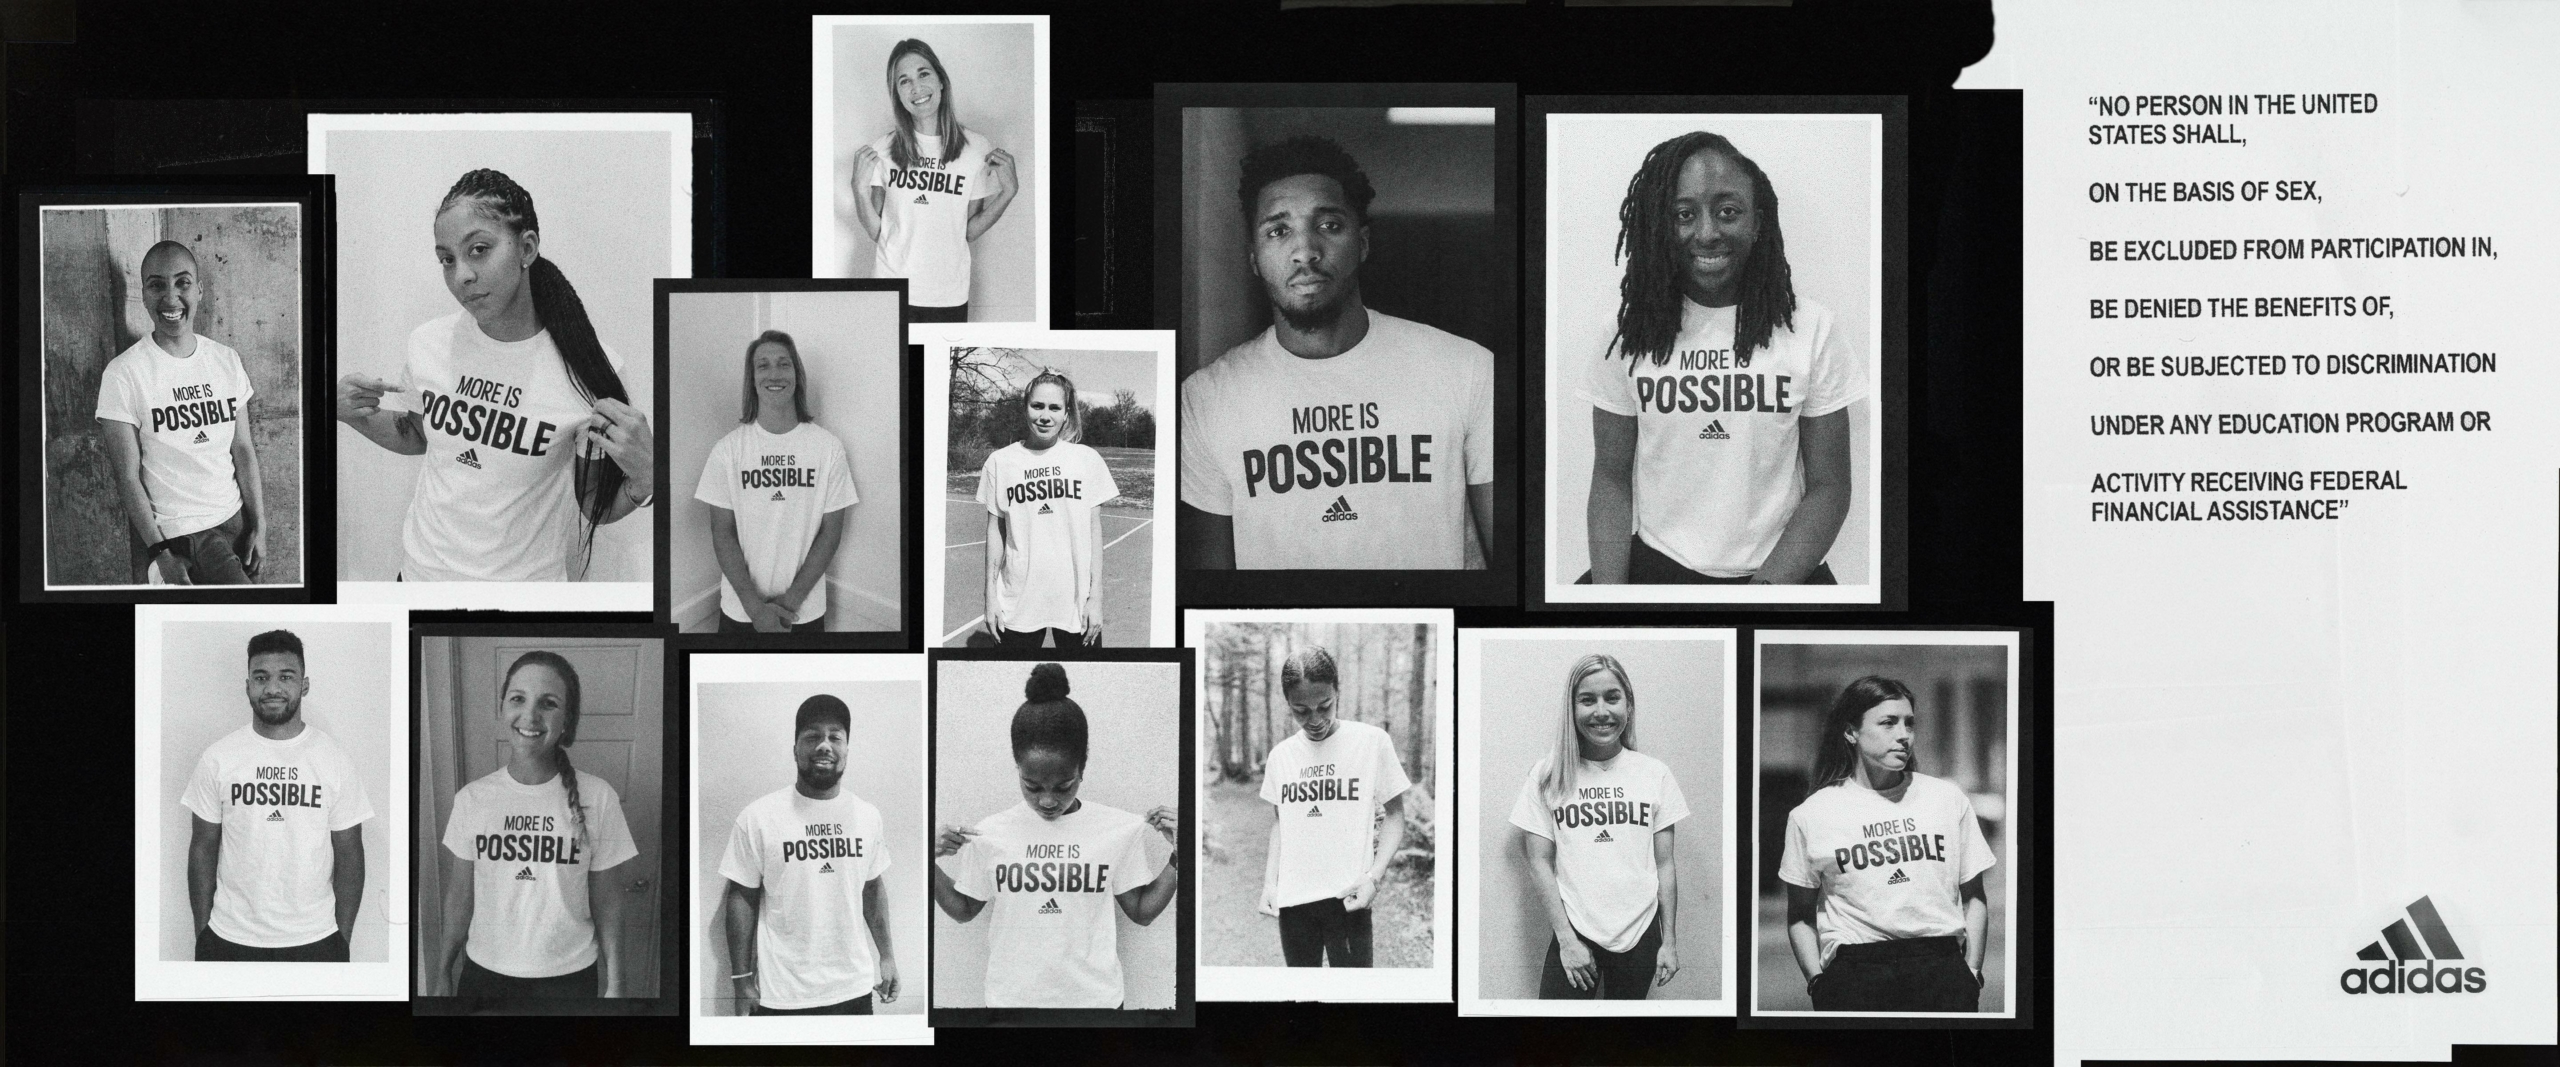 Adidas launches network with plans to include over 50,000 student-athletes as paid ambassadors